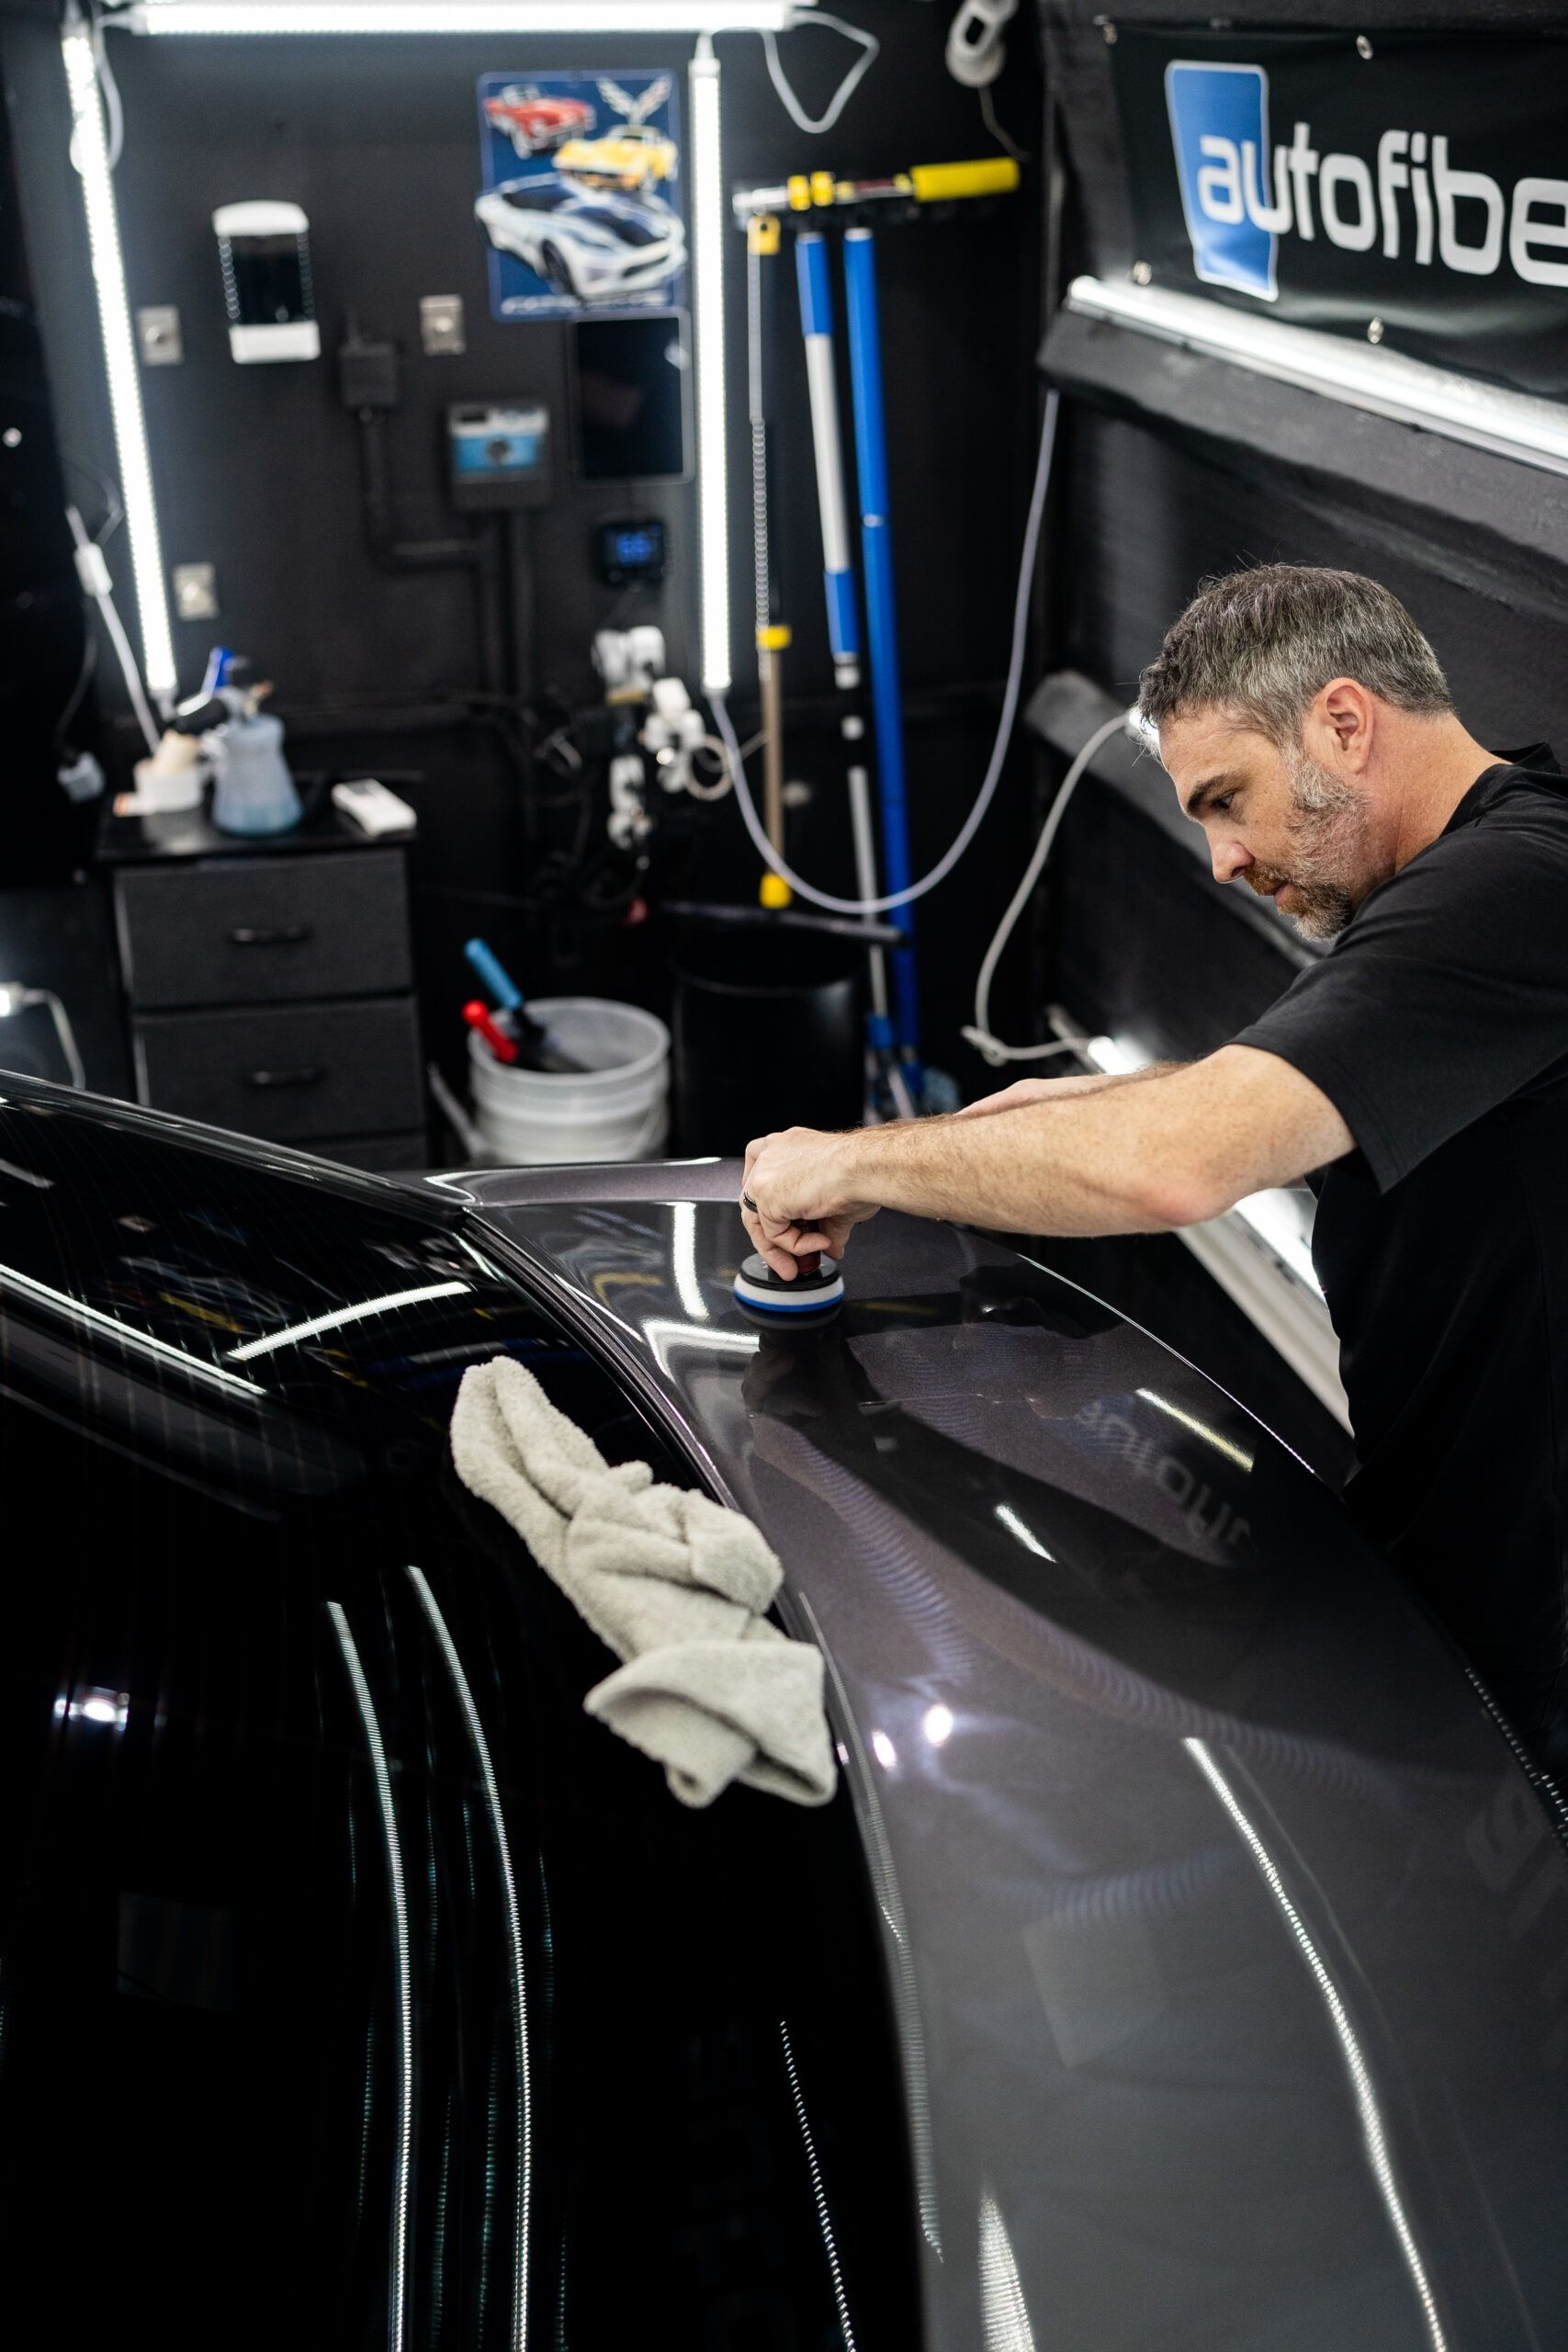 A man is polishing the hood of a car in a garage.